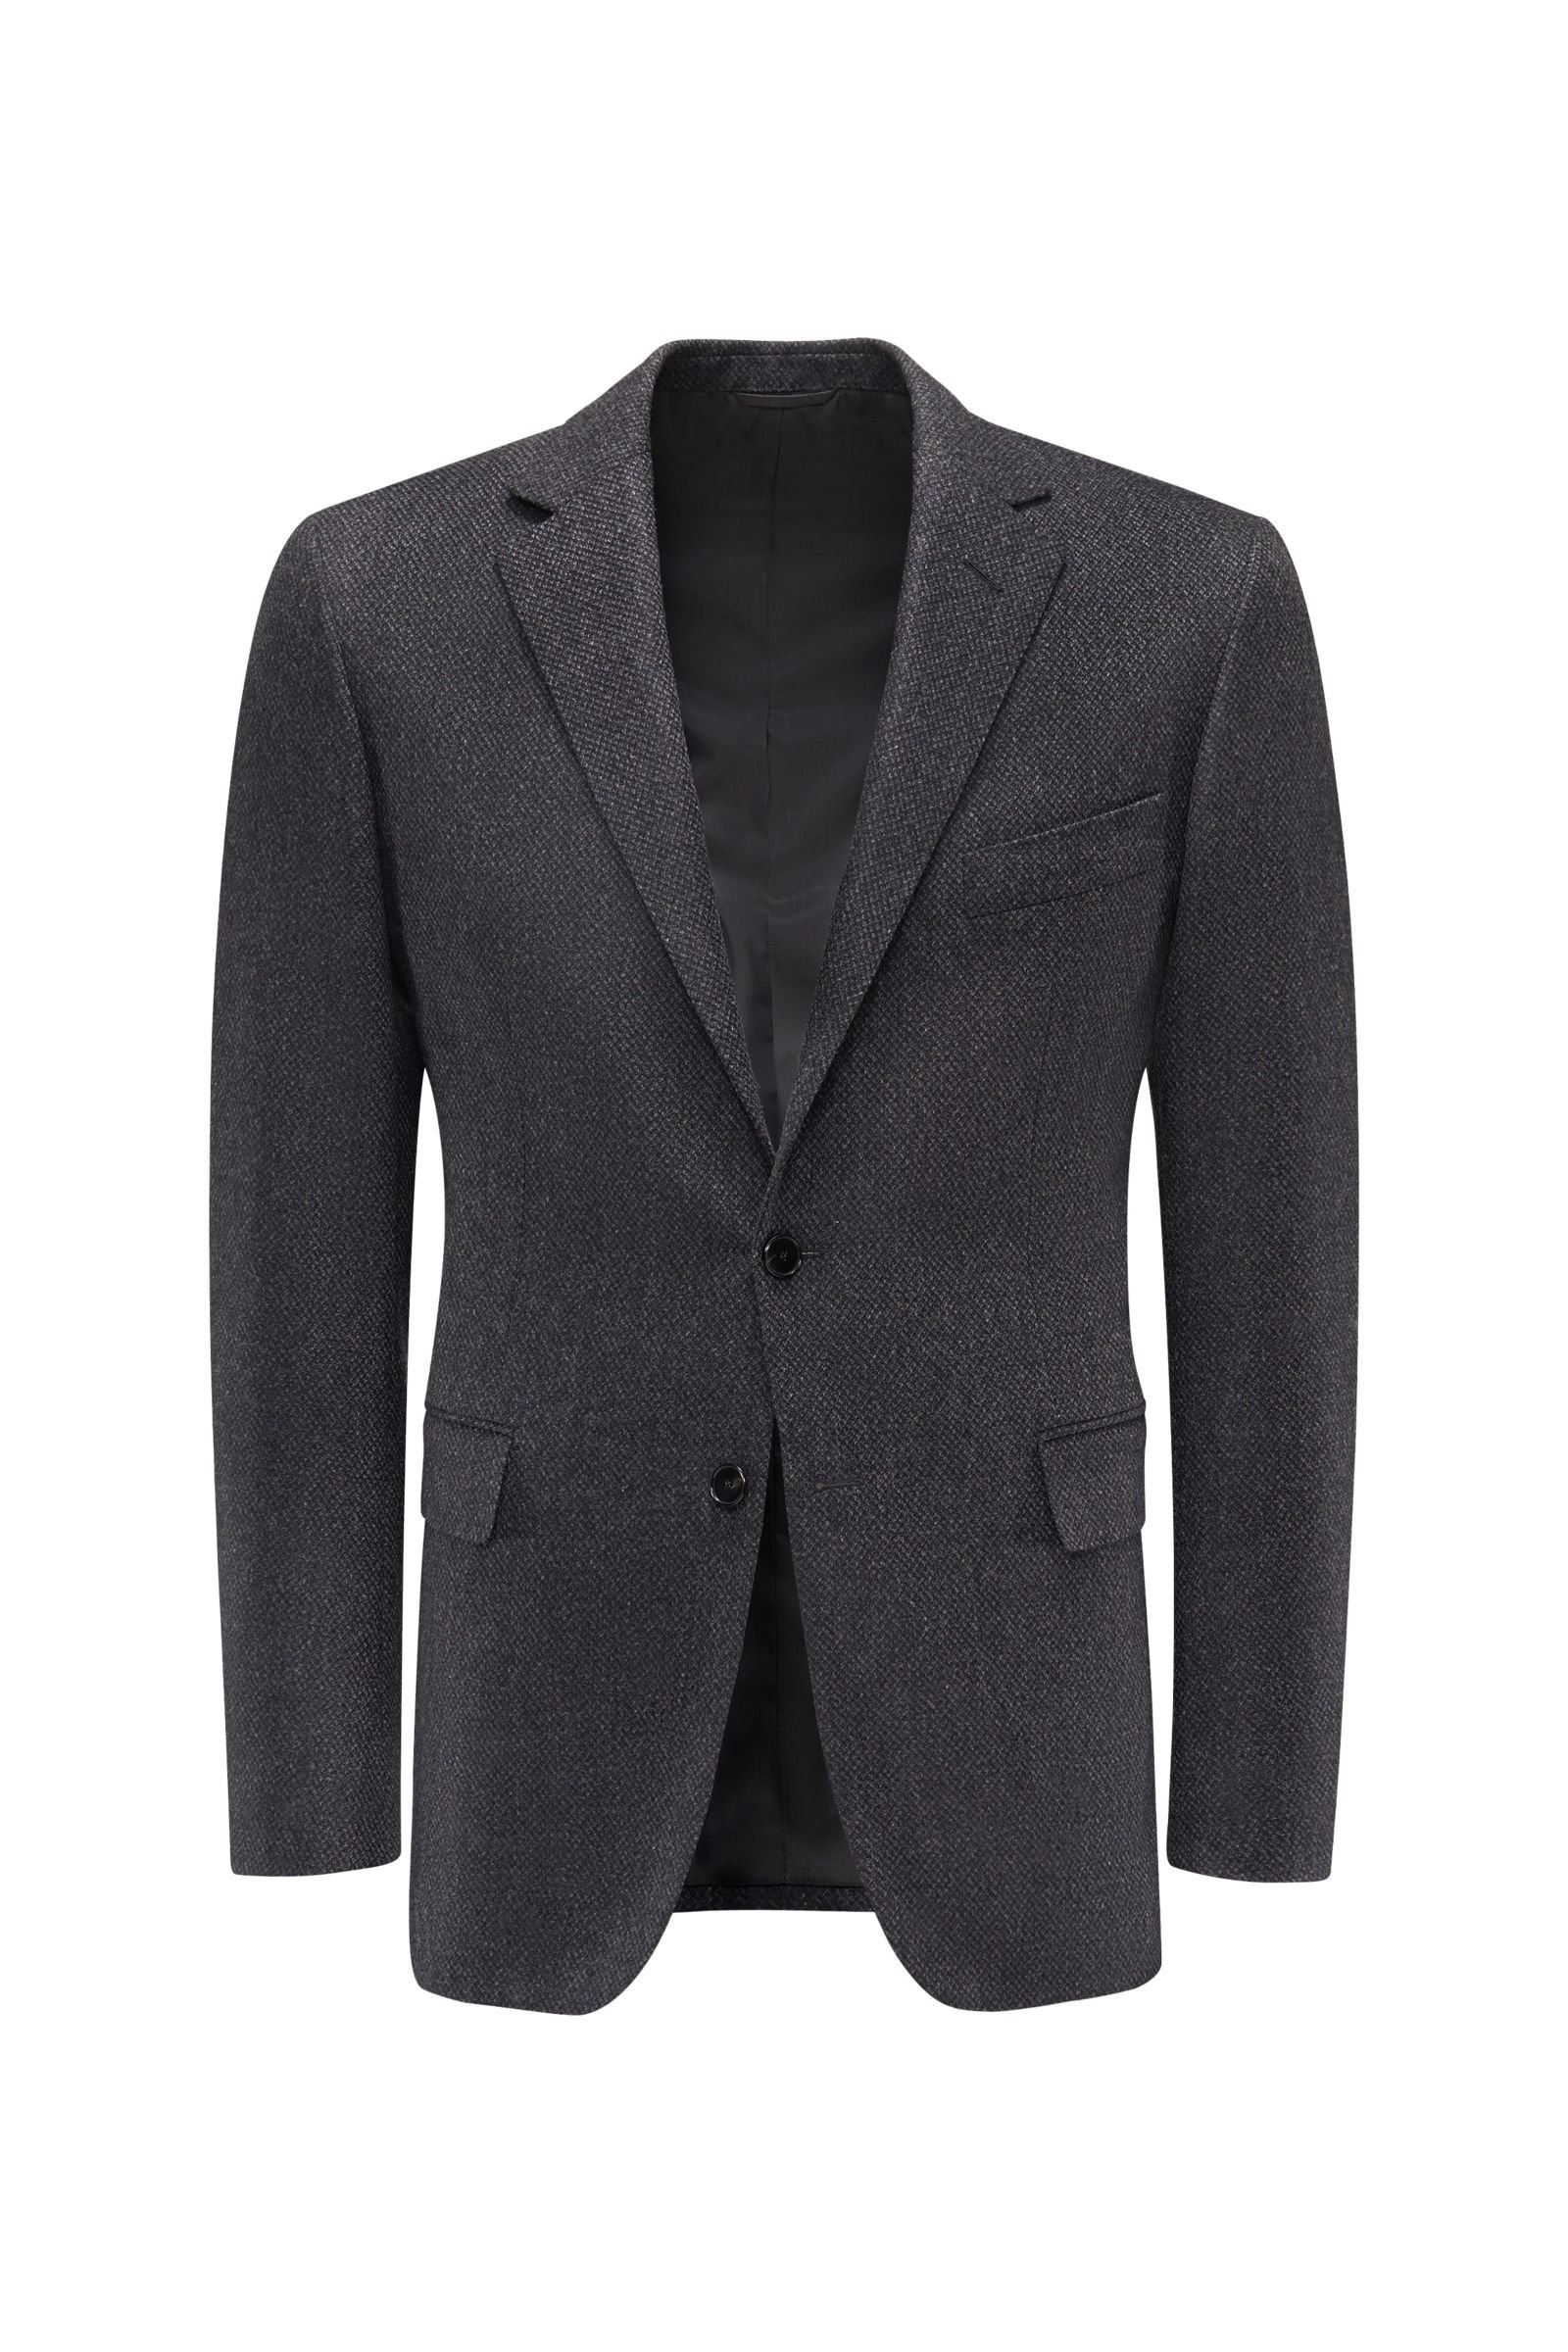 Smart-casual jacket anthracite patterned